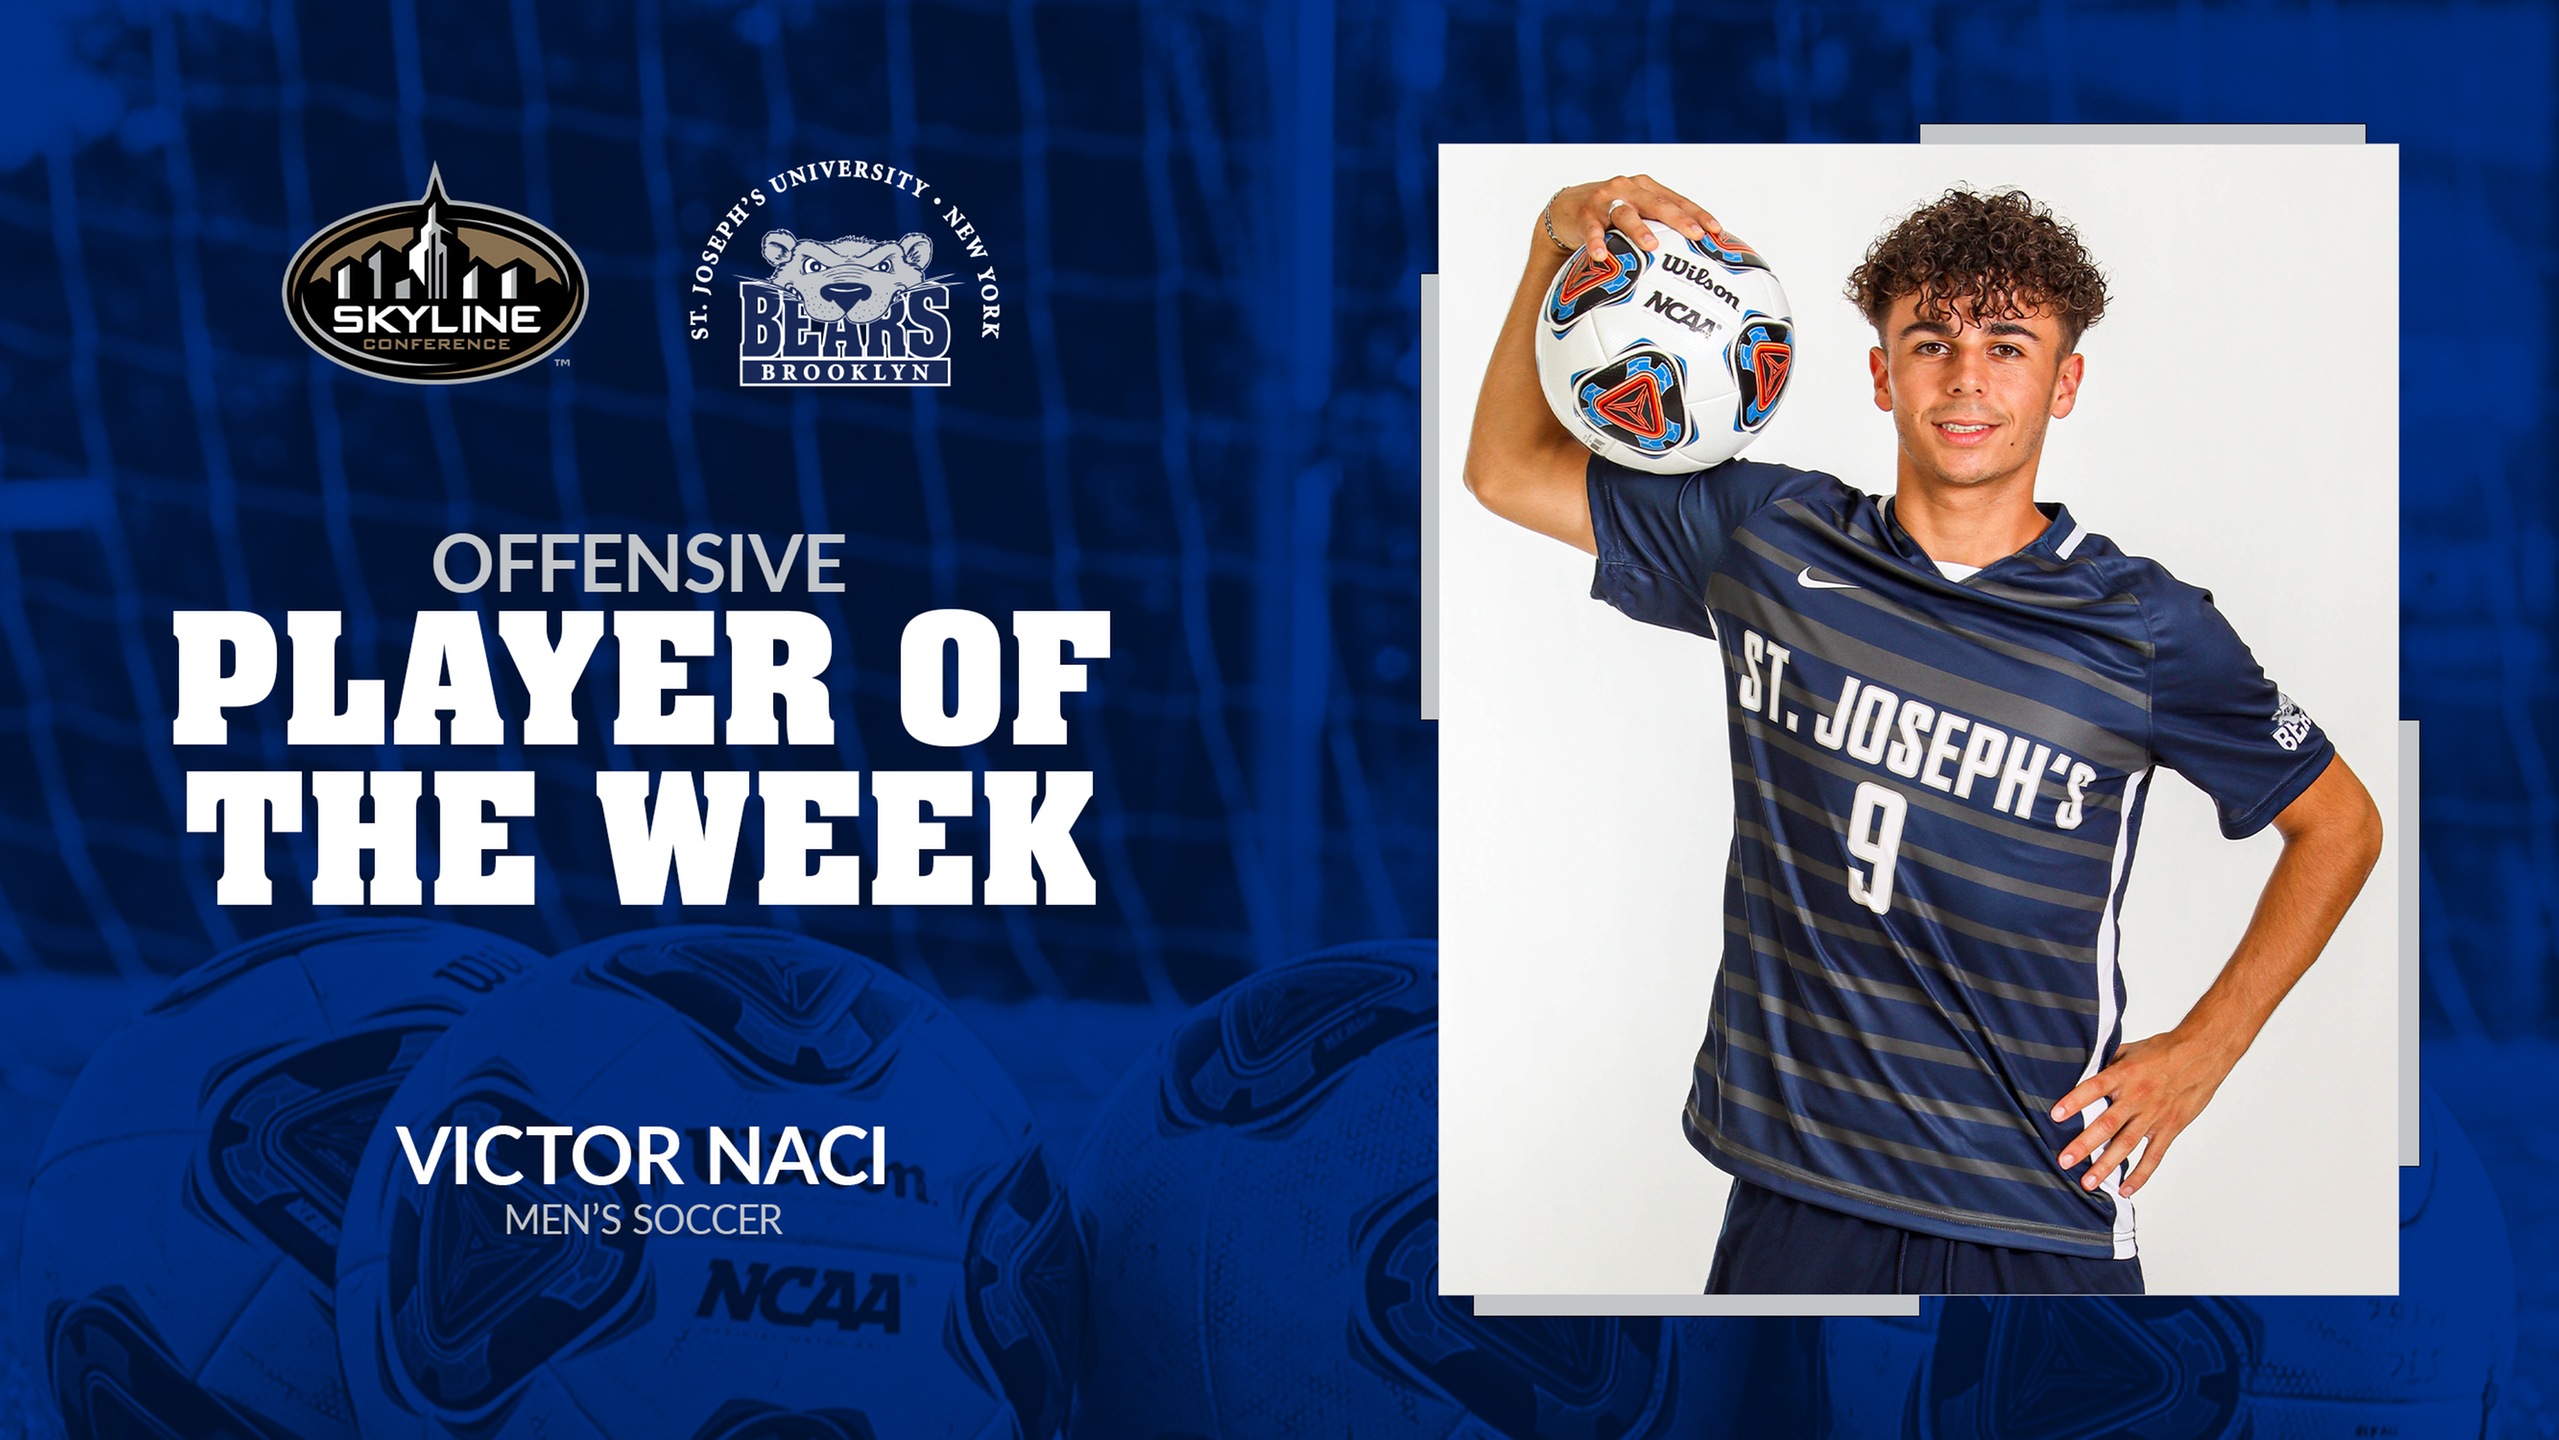 Naci Repeats as Skyline Men's Soccer Offensive Player of the Week